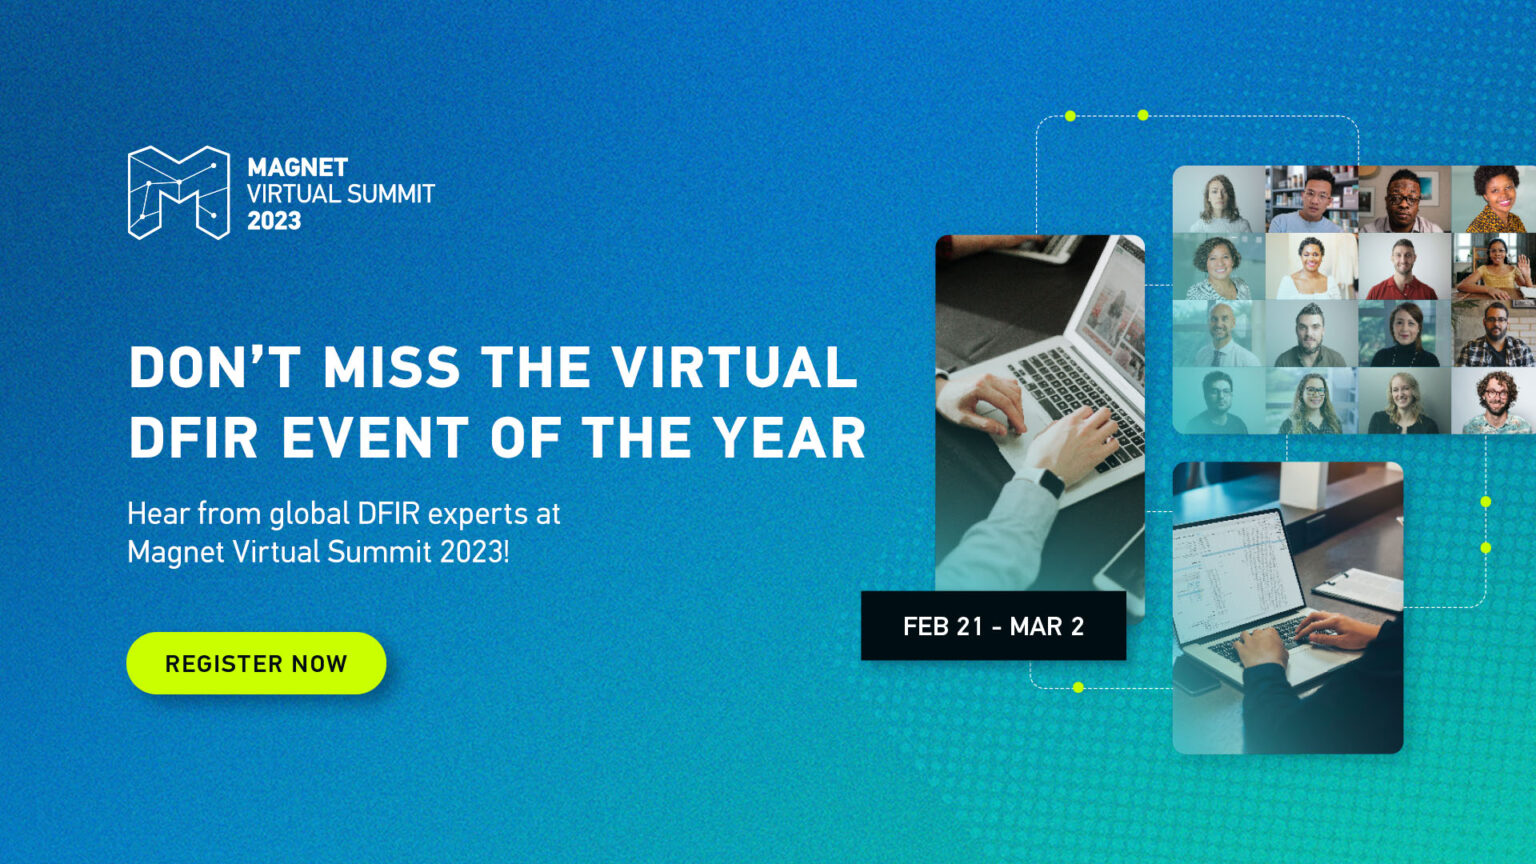 Virtual Summit 2023 The Virtual DFIR Event of the Year is